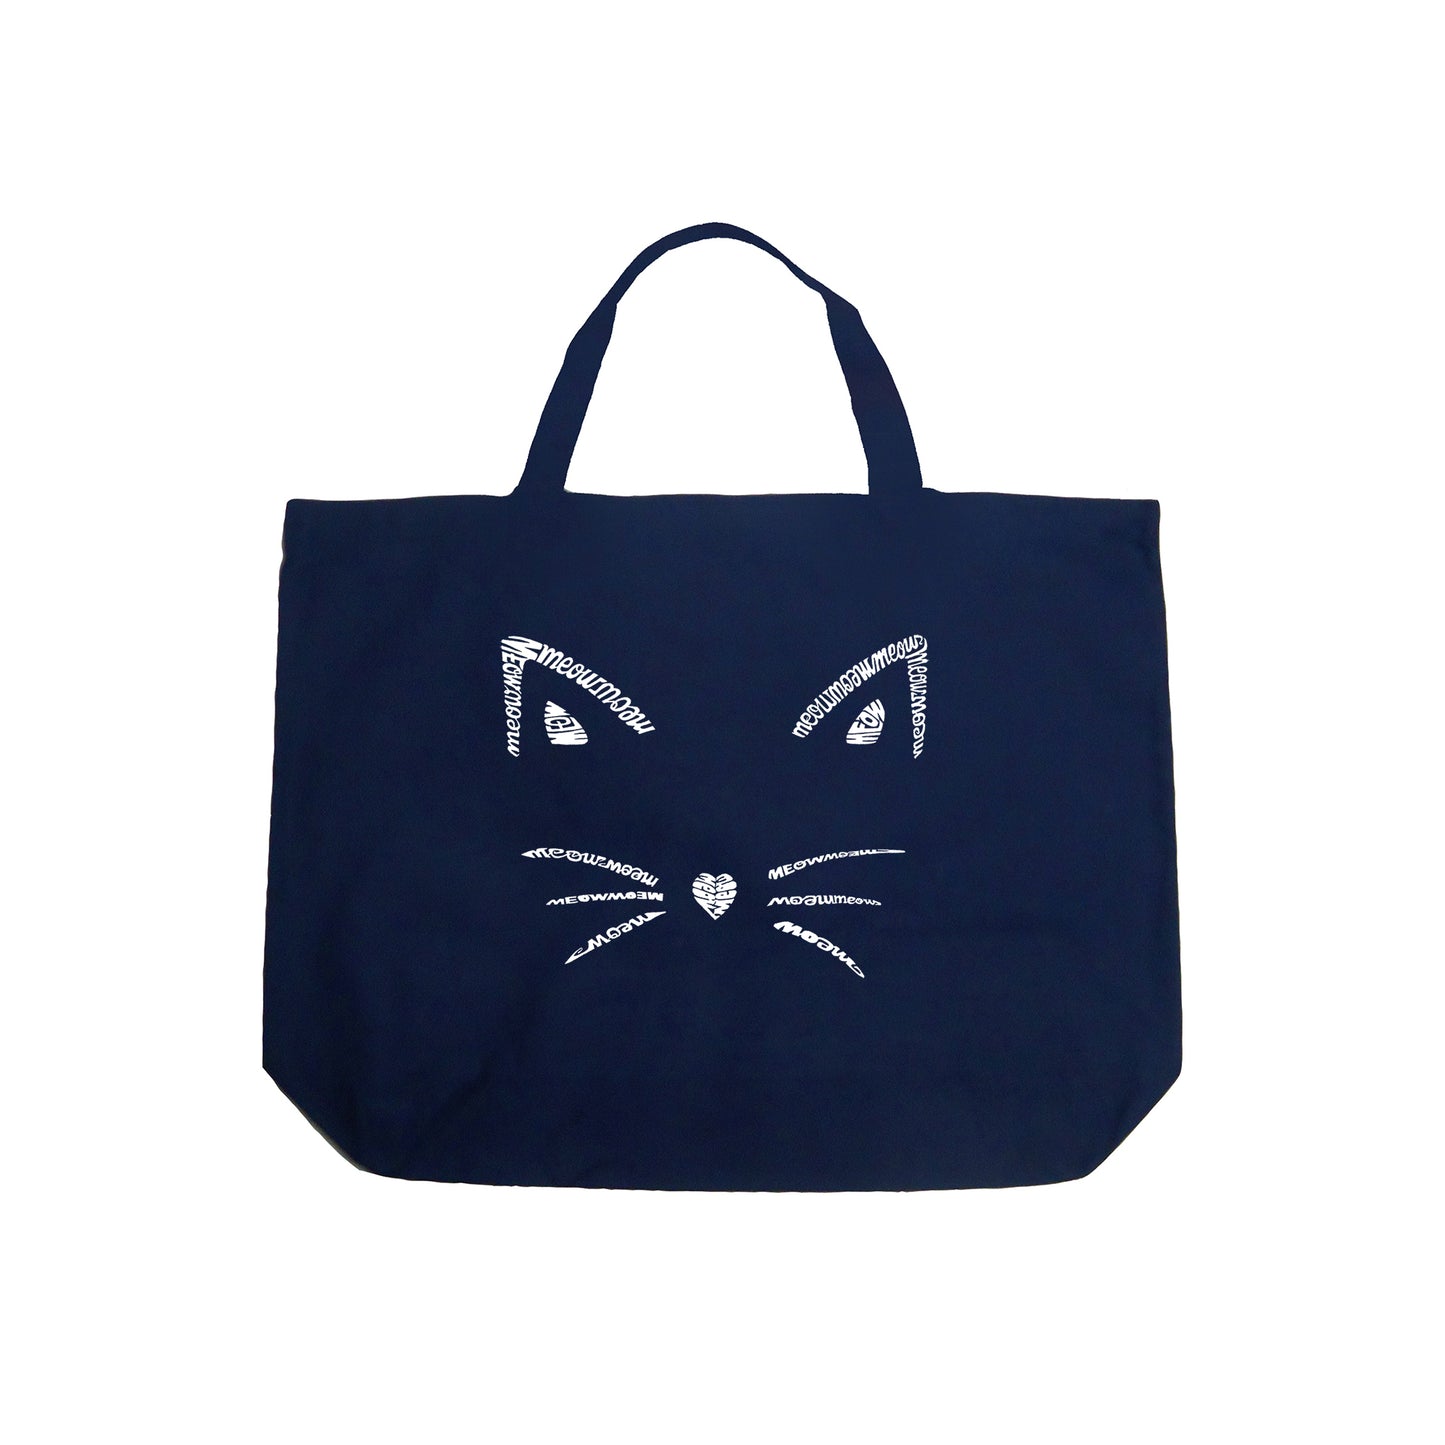 Whiskers  - Large Word Art Tote Bag